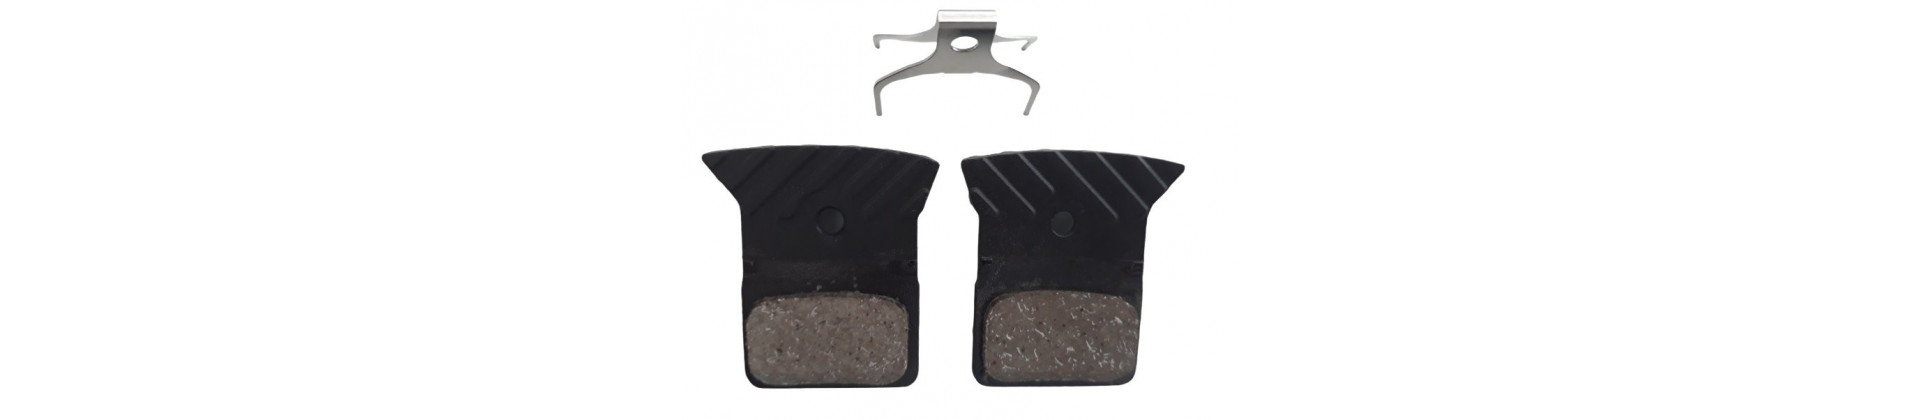 Road bike brake shoes, pads and accessories